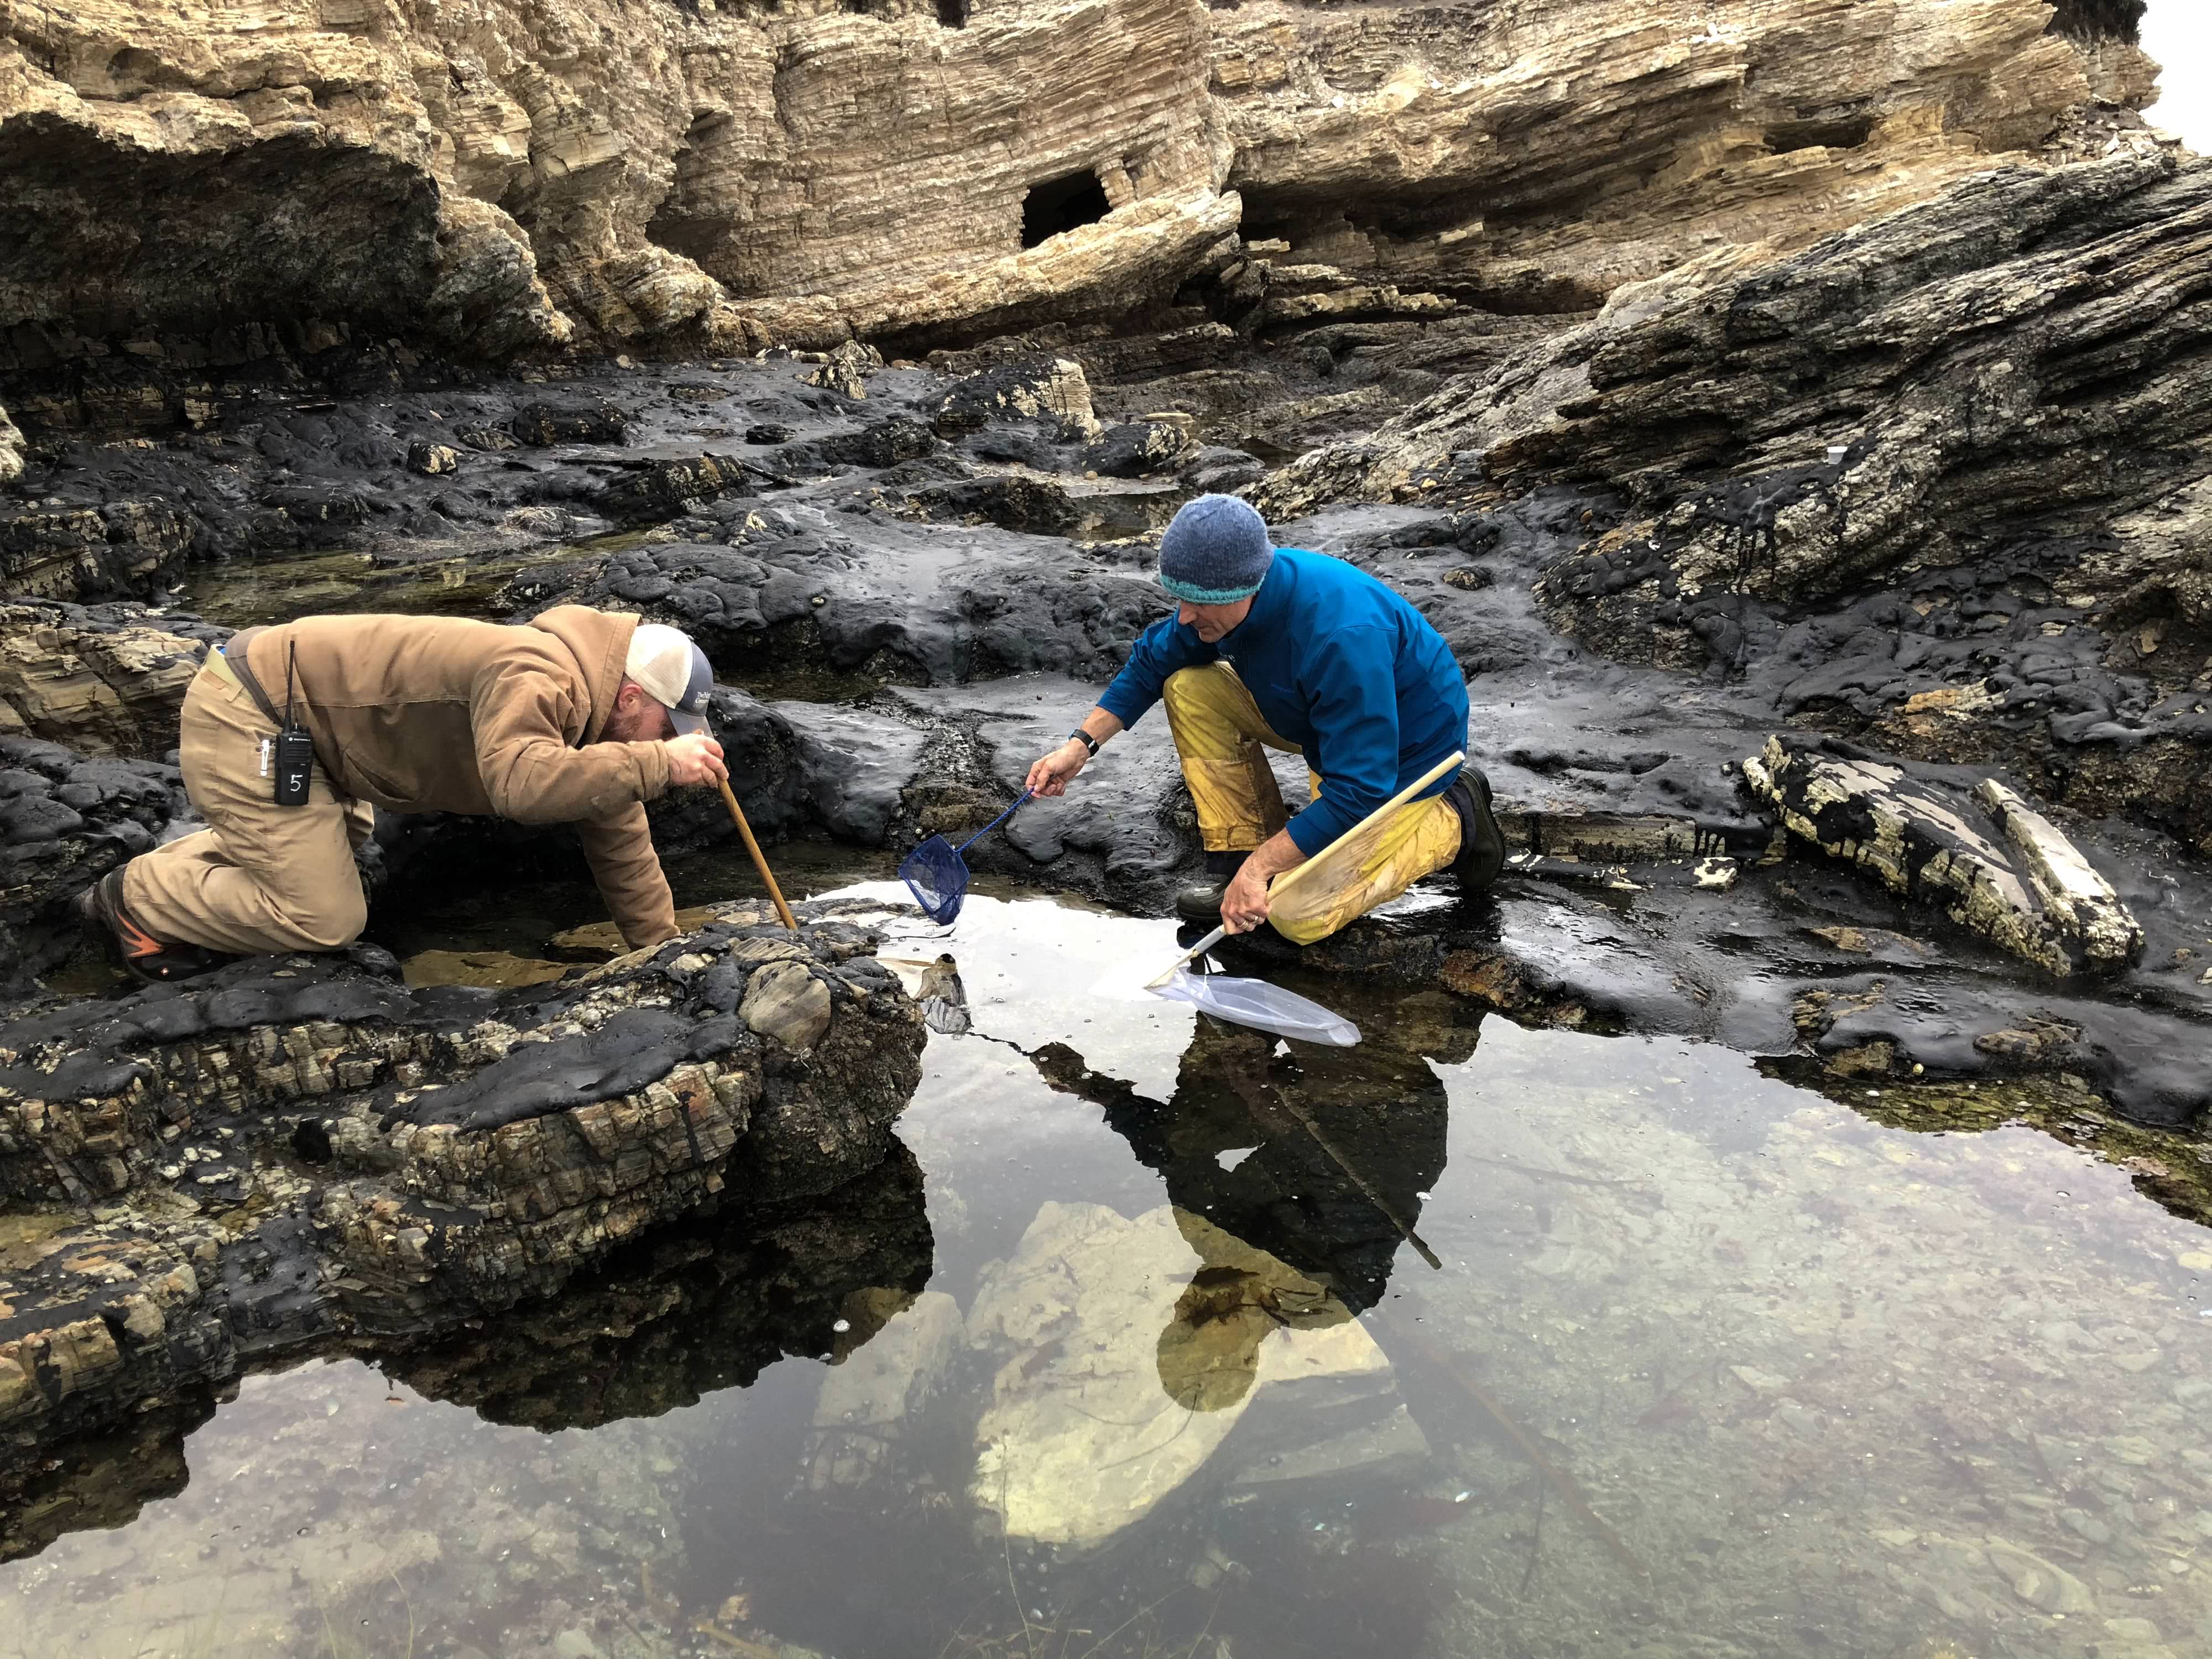 Staff at The Nature Conservancy collect tide pool samples during low tide.